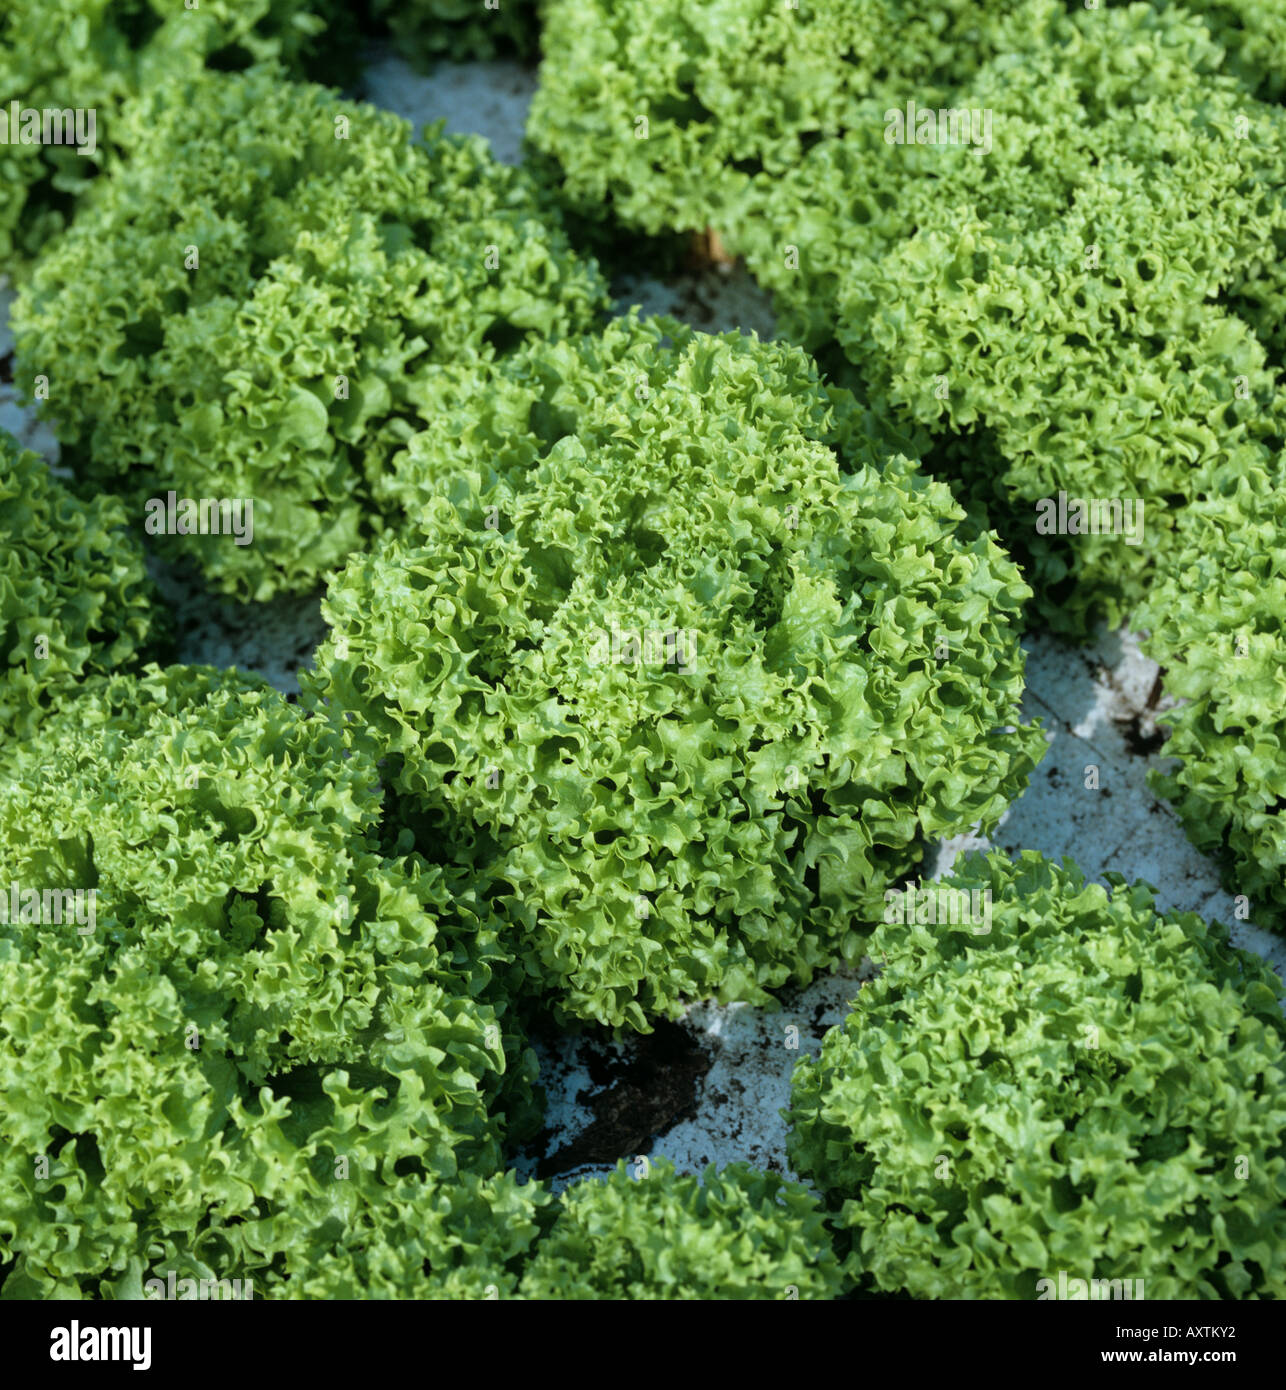 Lollo biondo lettuces grown hydroponically under glass Hertfordshire Stock Photo